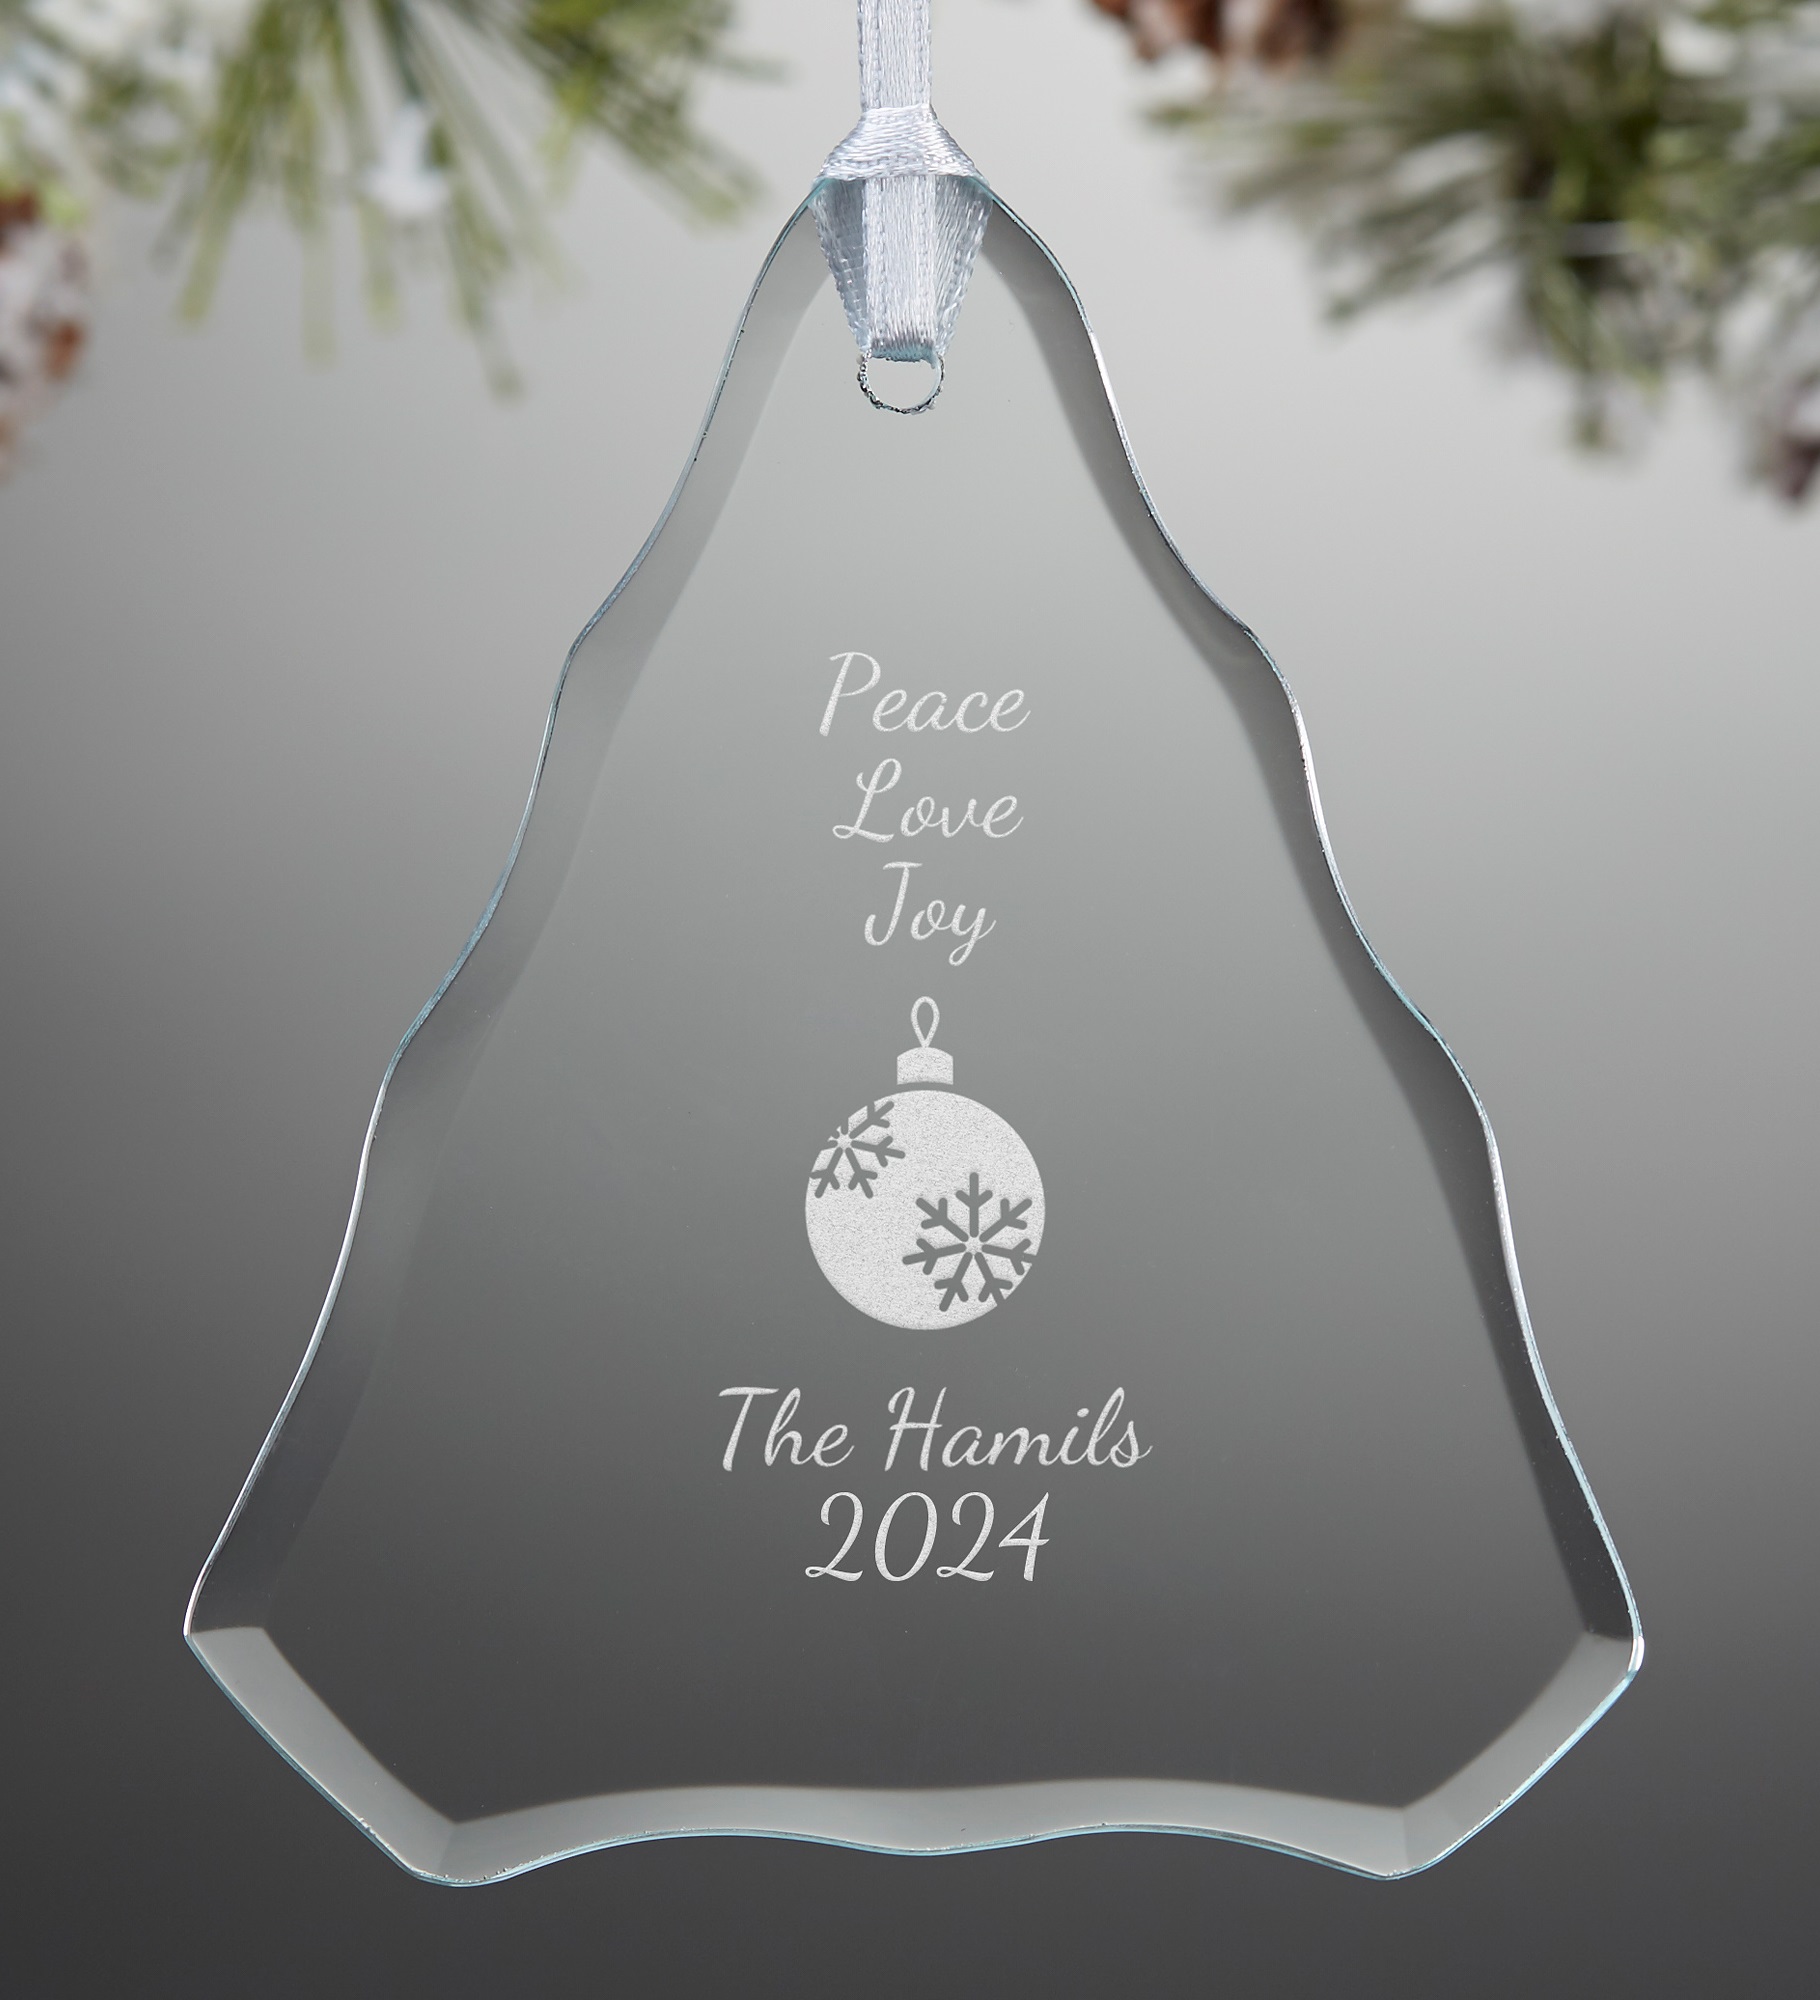 Create Your Own Personalized Tree Ornament 